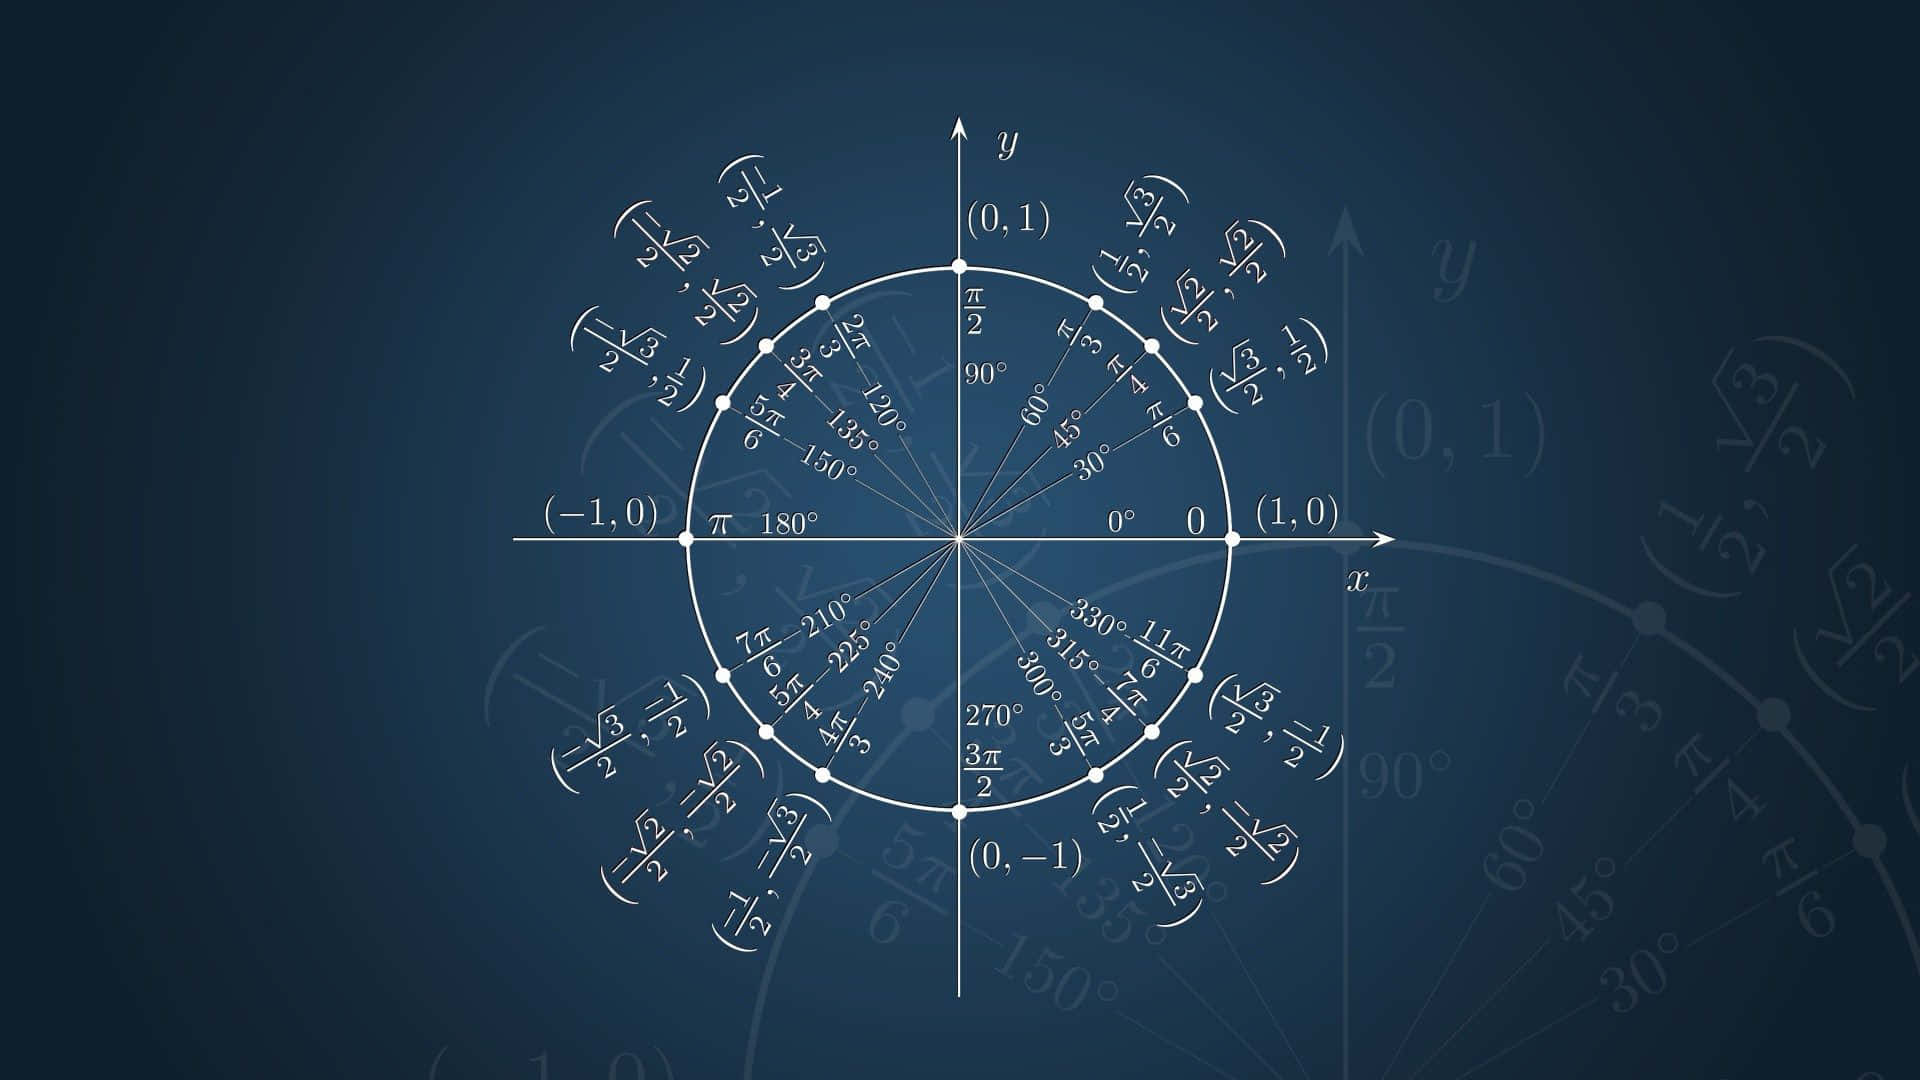 Free Cool Math Wallpaper Downloads, [100+] Cool Math Wallpapers for FREE |  